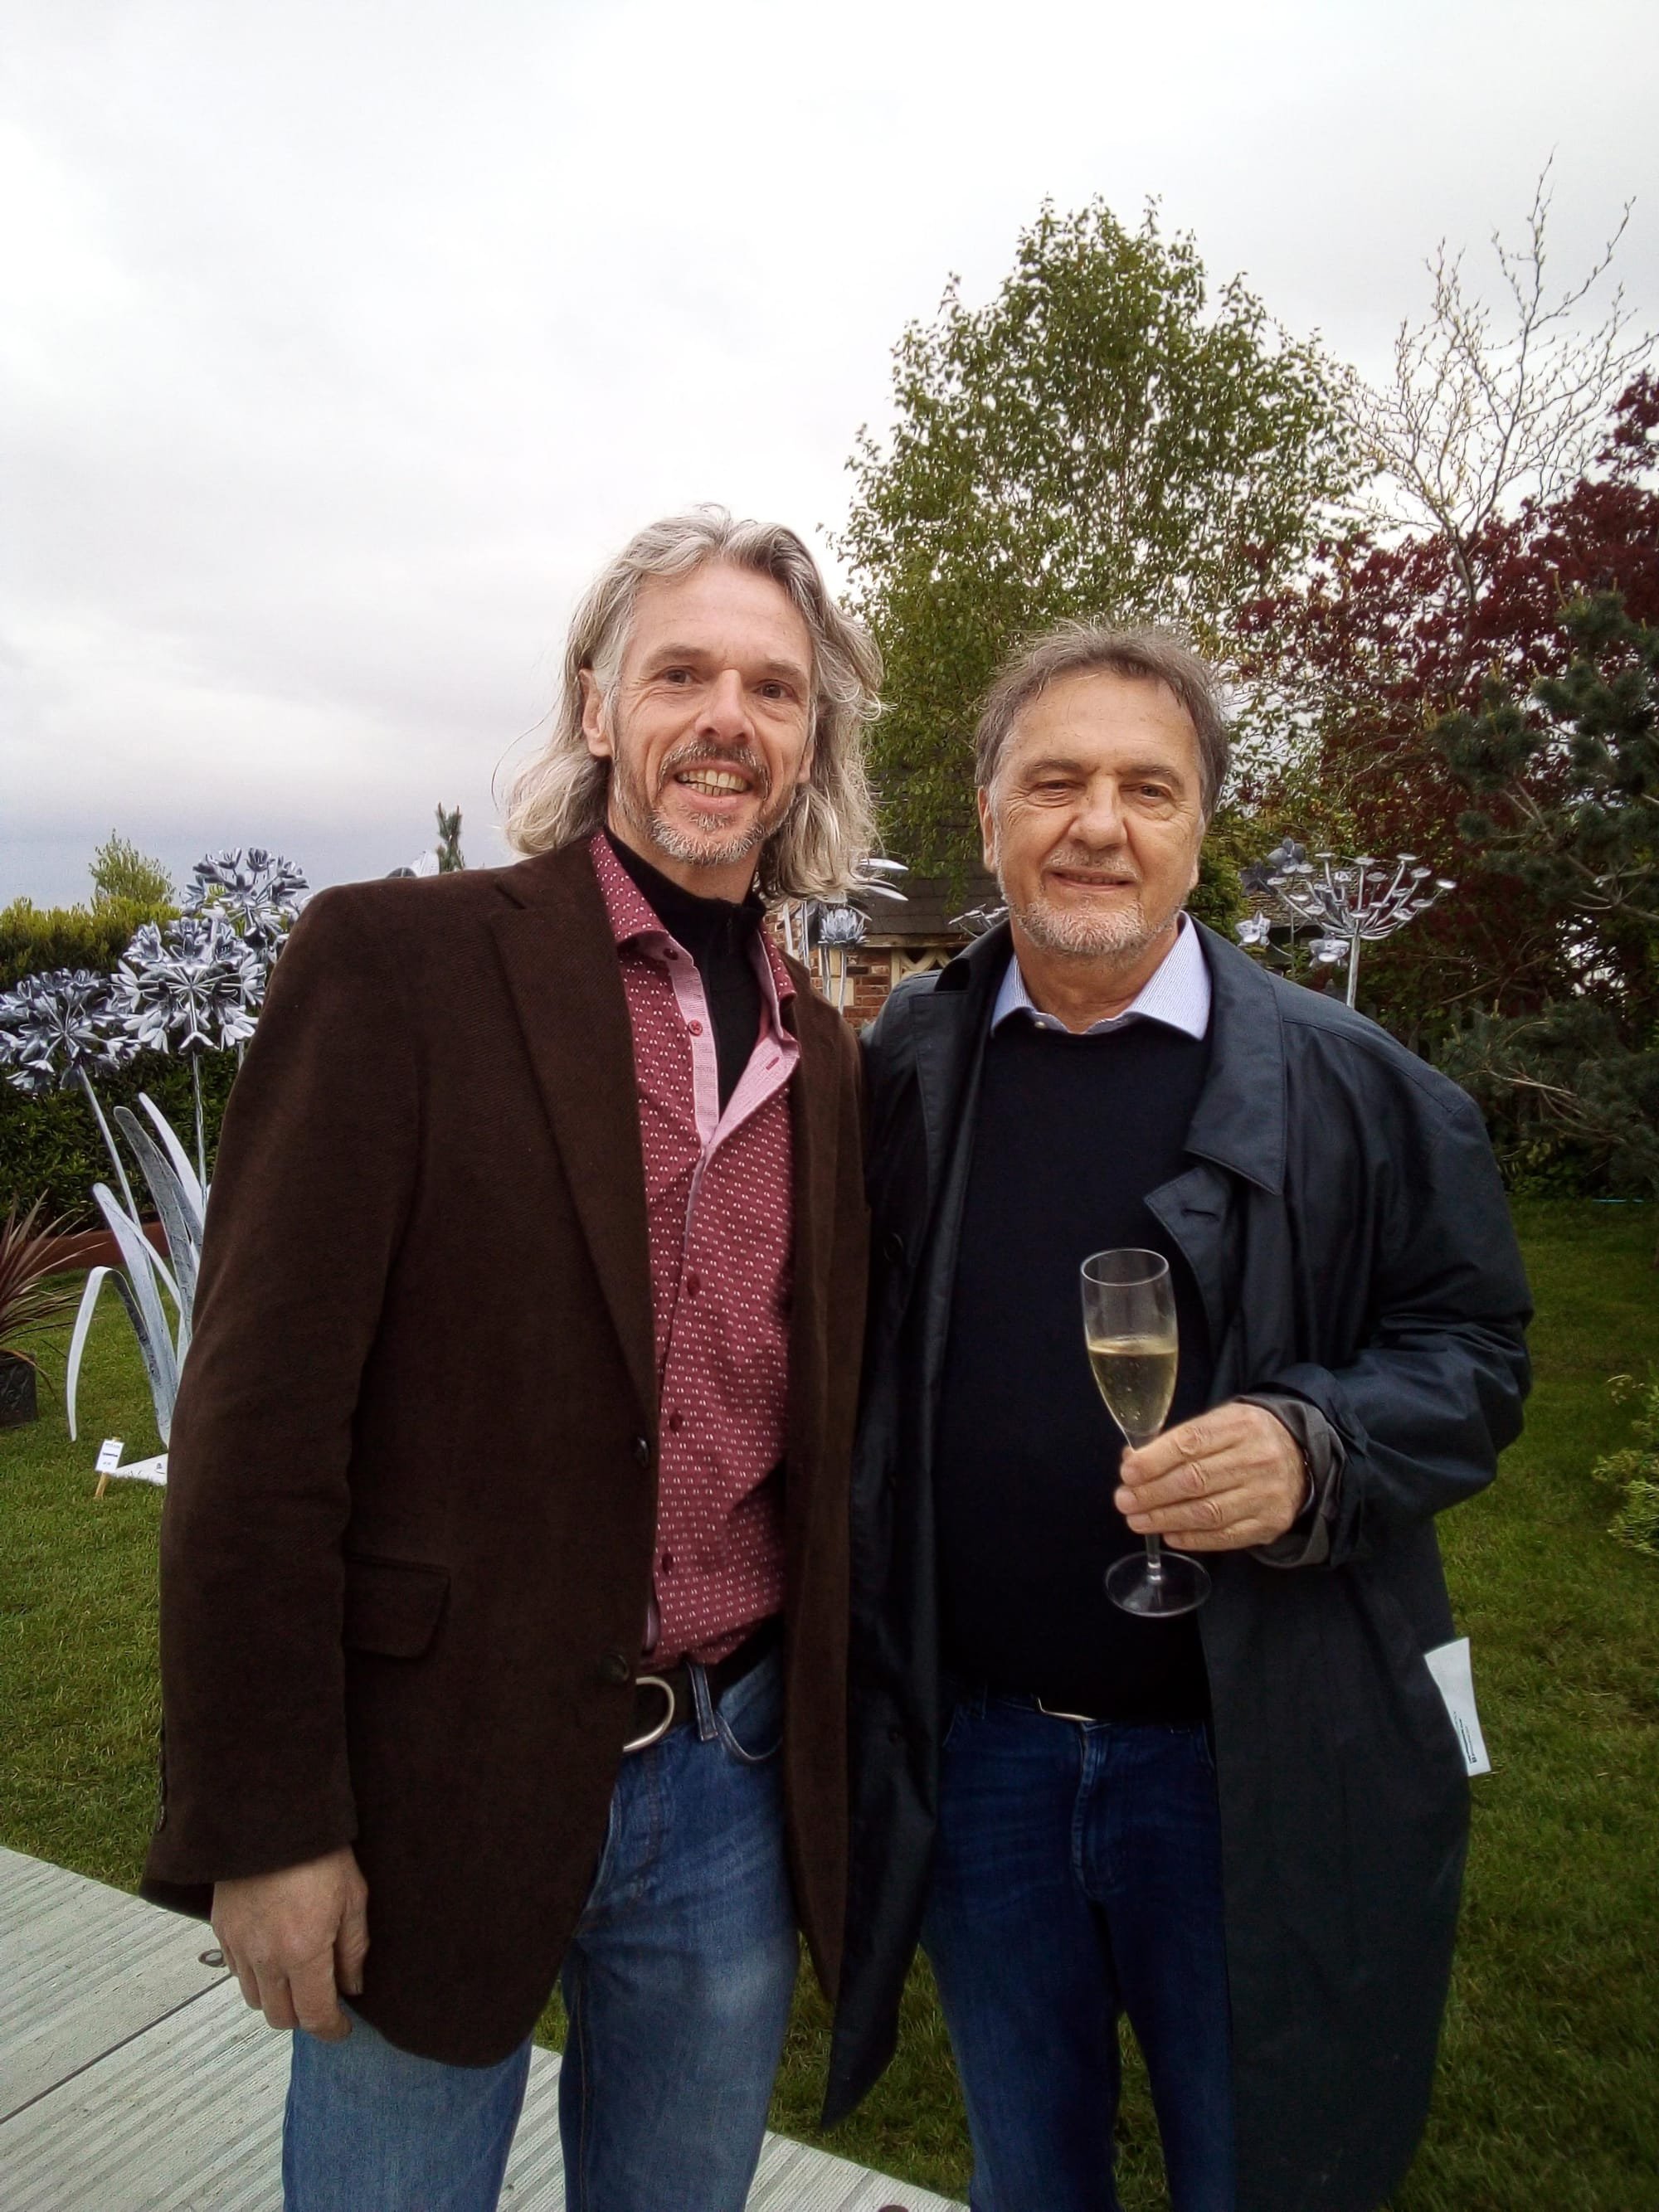 Delighted to have a visit from the wonderful Raymond Blanc.